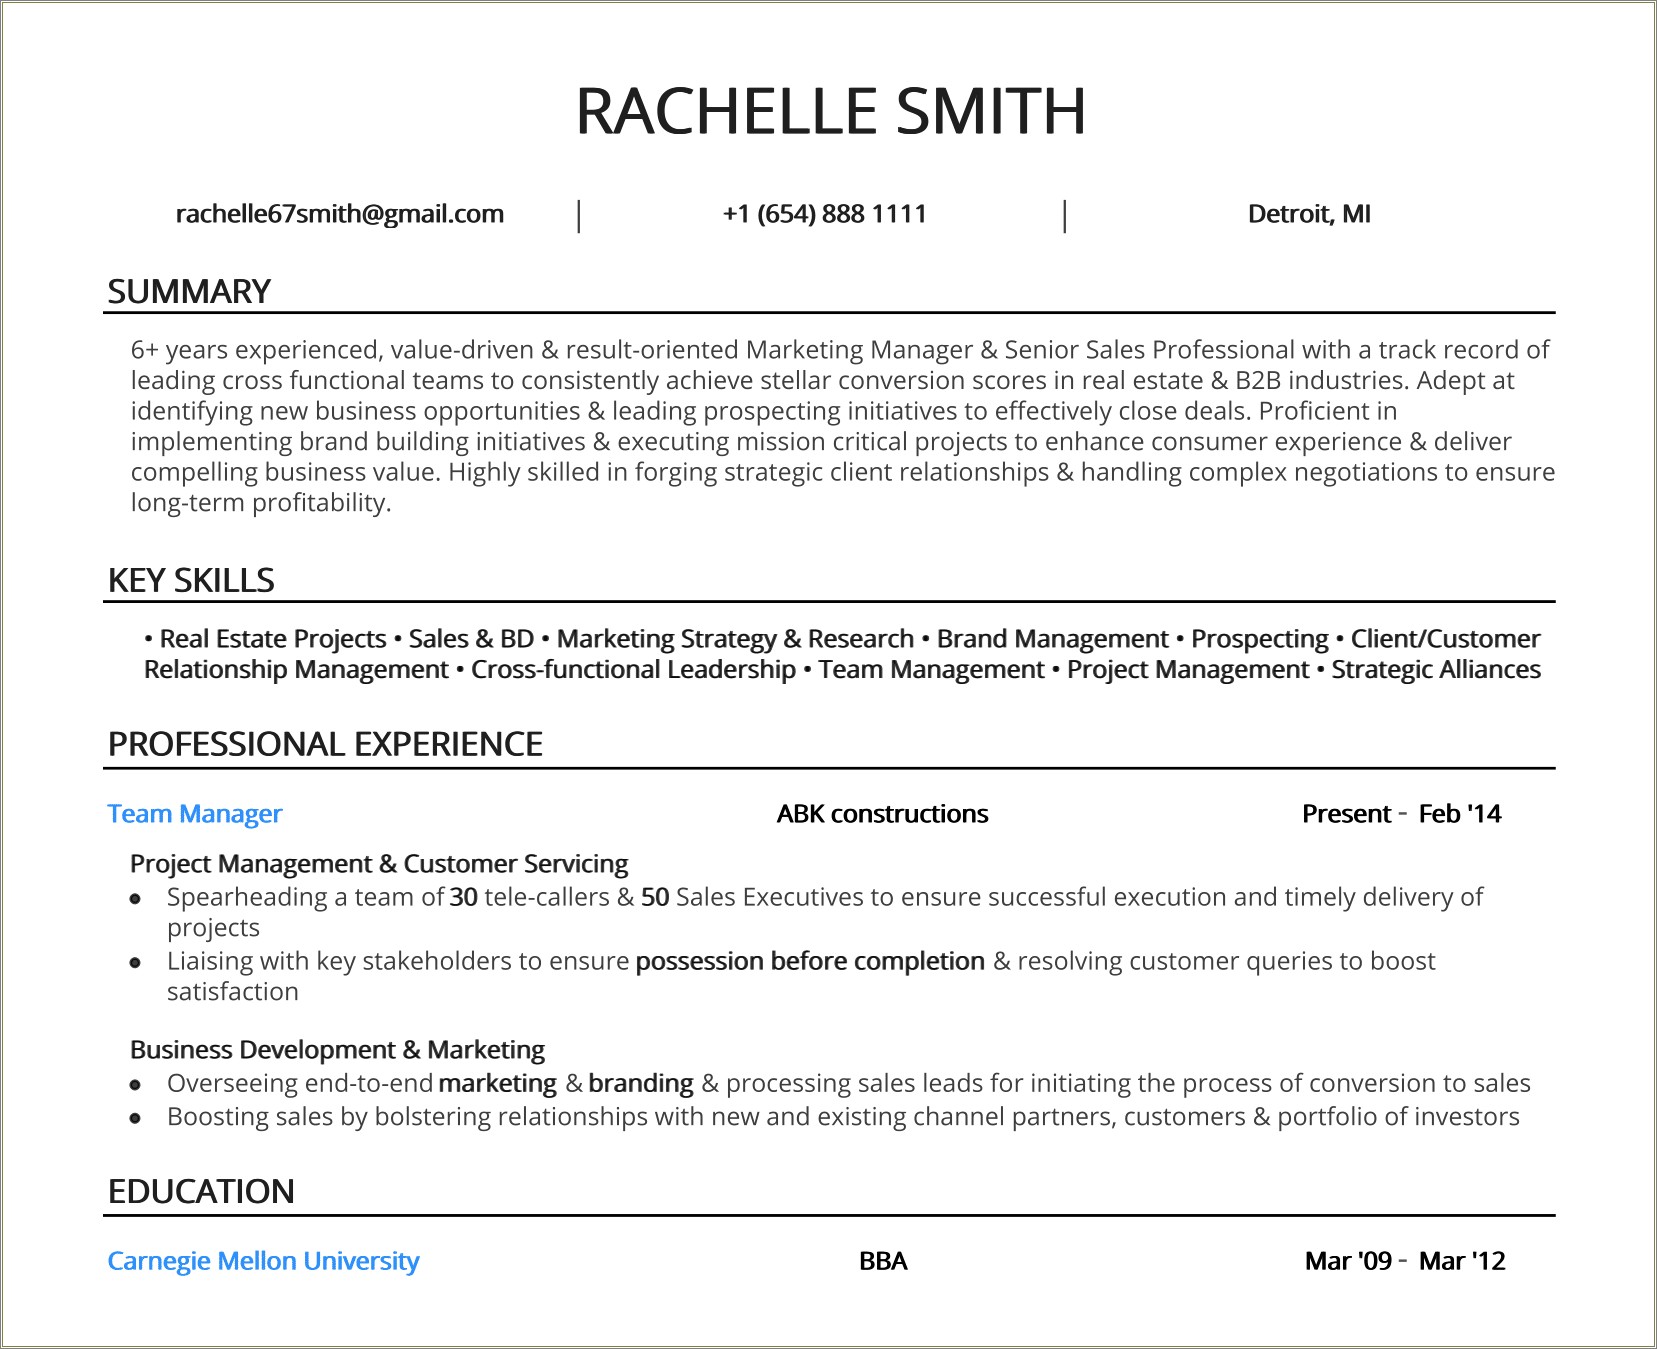 Work Experience And Education On Same Page Resume